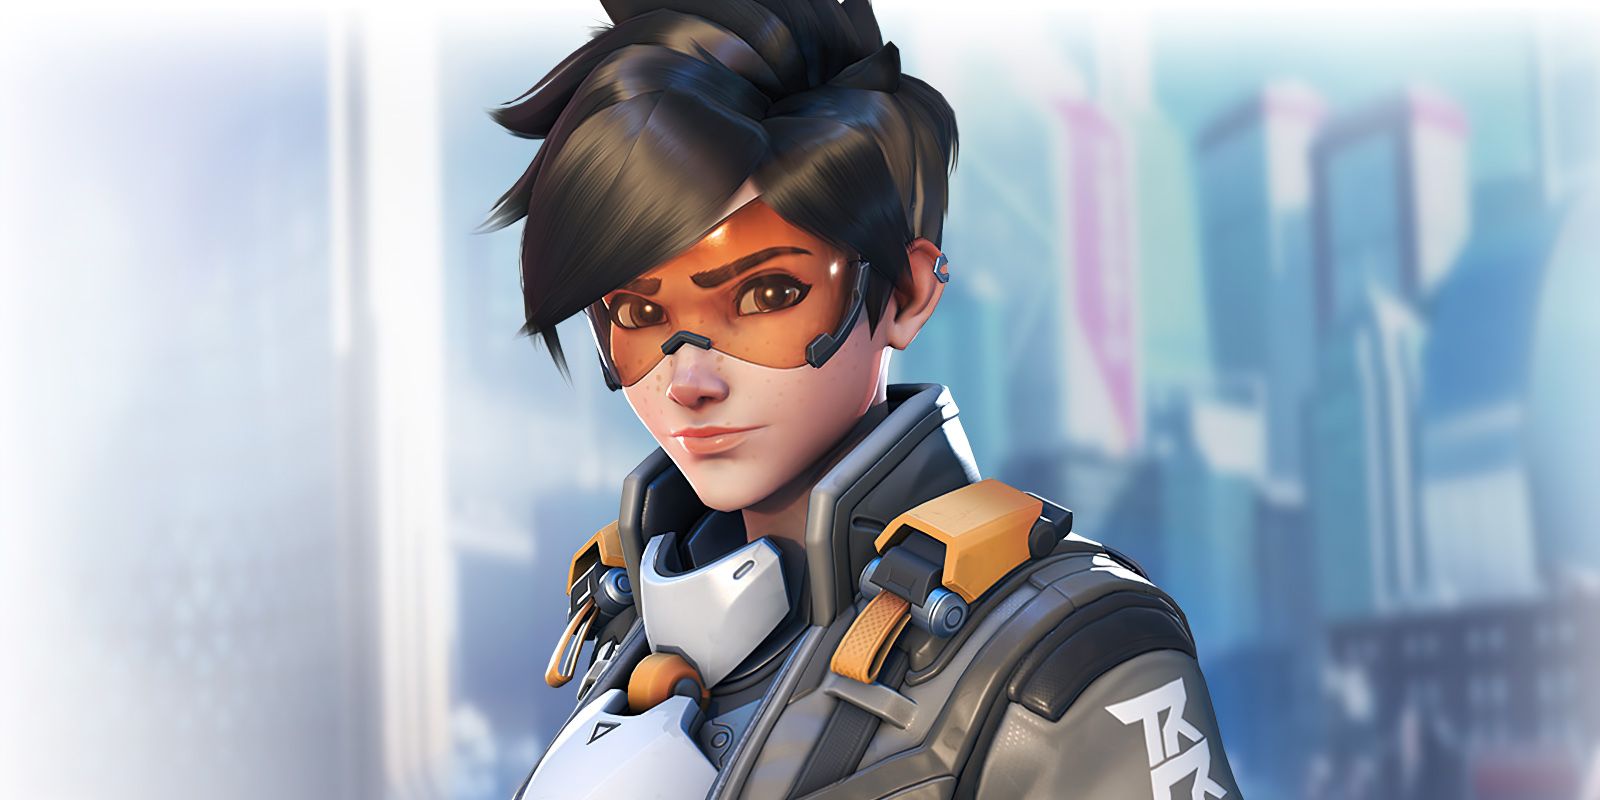 Tracer posing in a promo image for Overwatch 